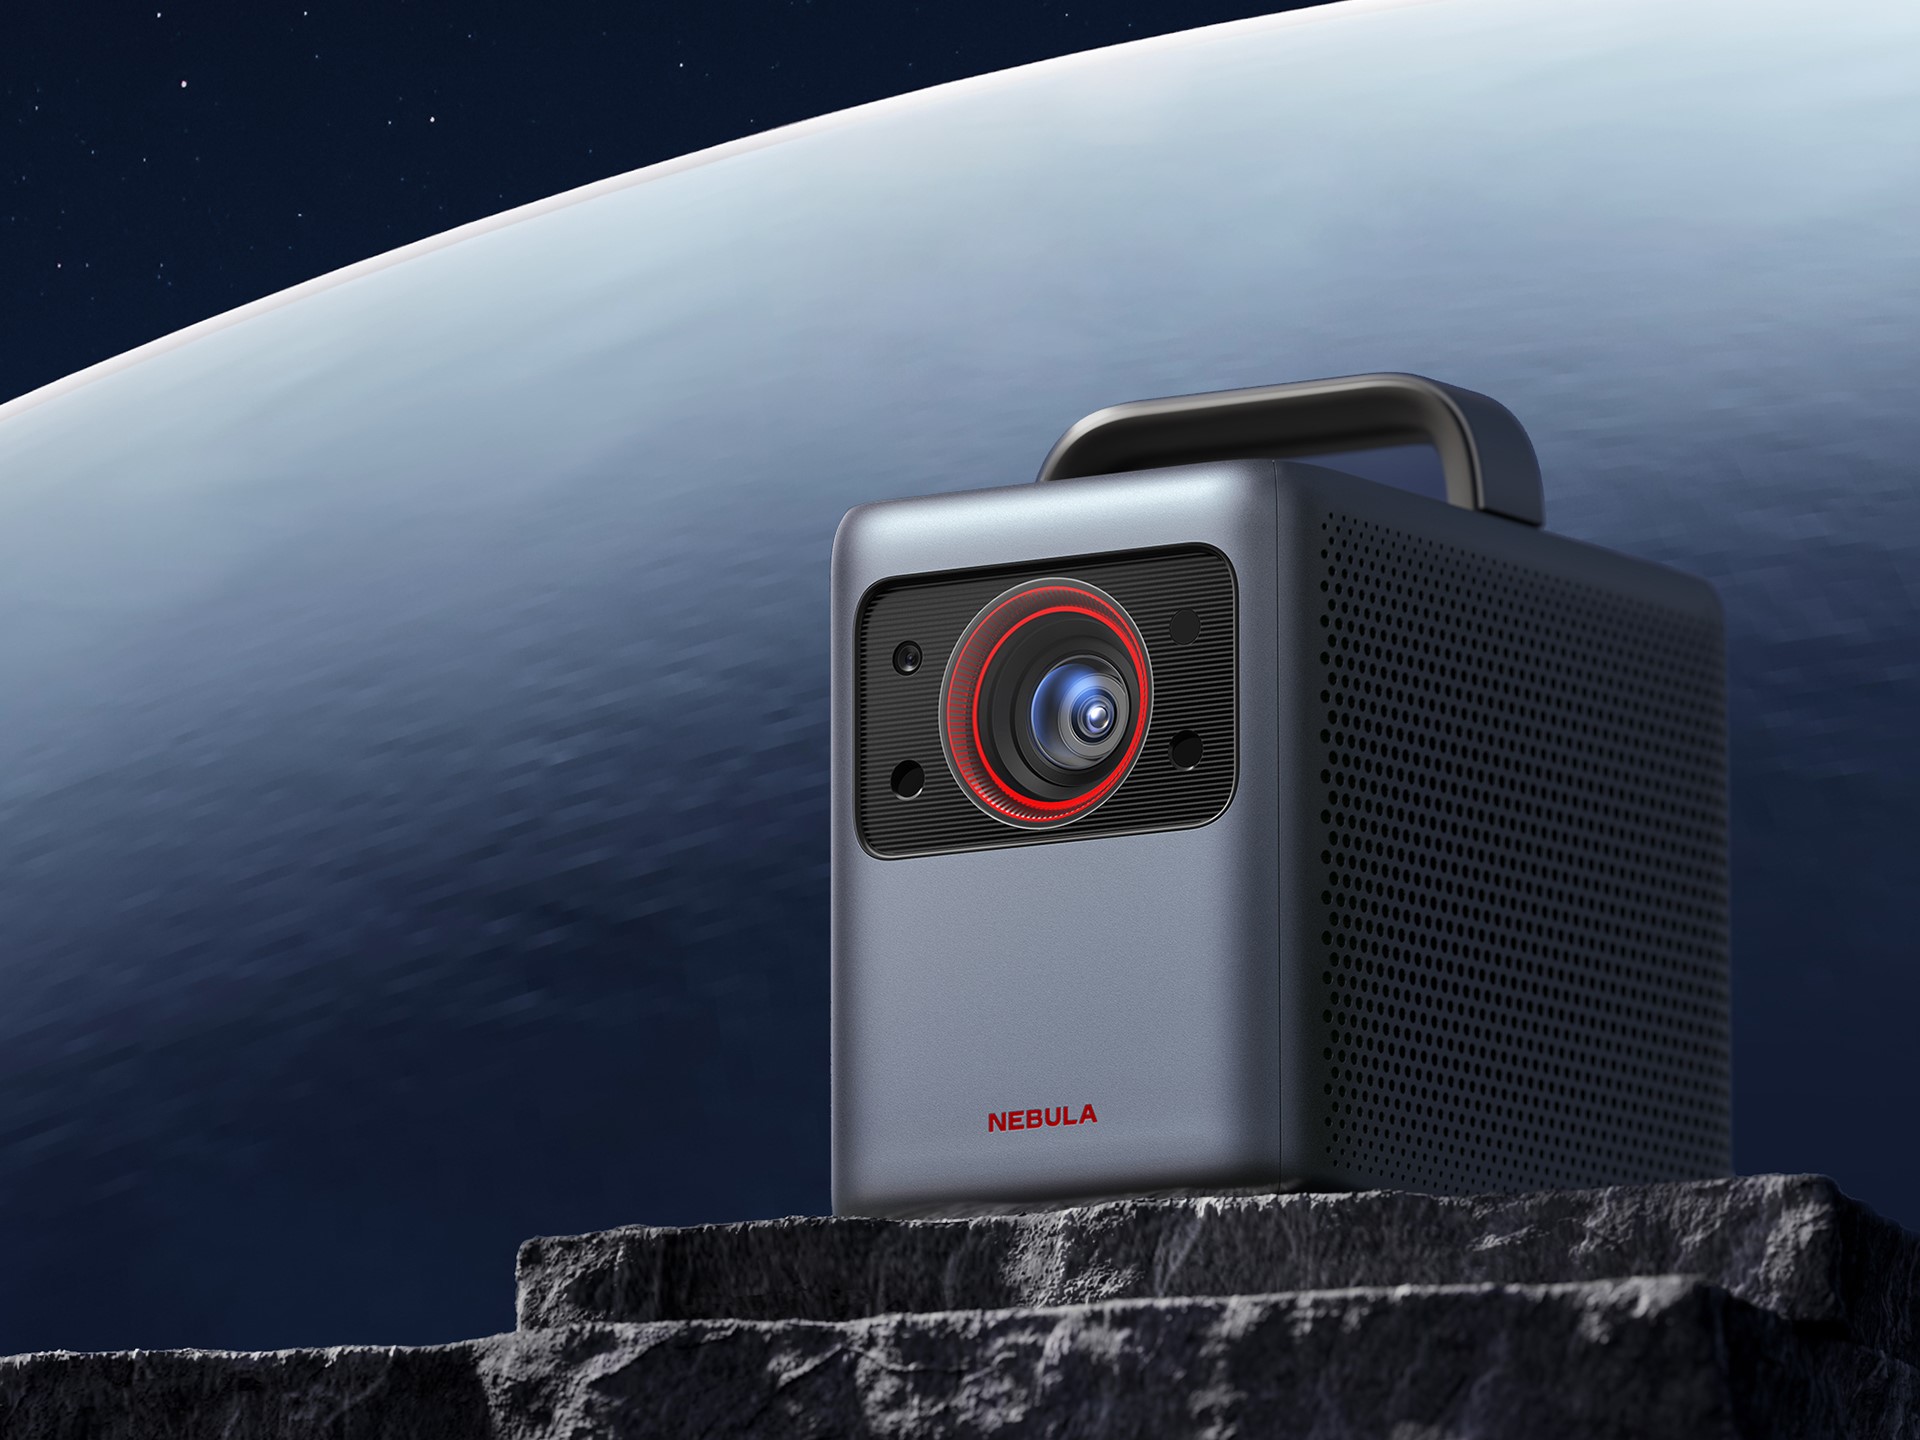 https://www.digitaltrends.com/wp-content/uploads/2022/01/nebula-by-anker-cosmos-laser-4k-on-the-moon.jpg?fit=1920%2C1440&p=1